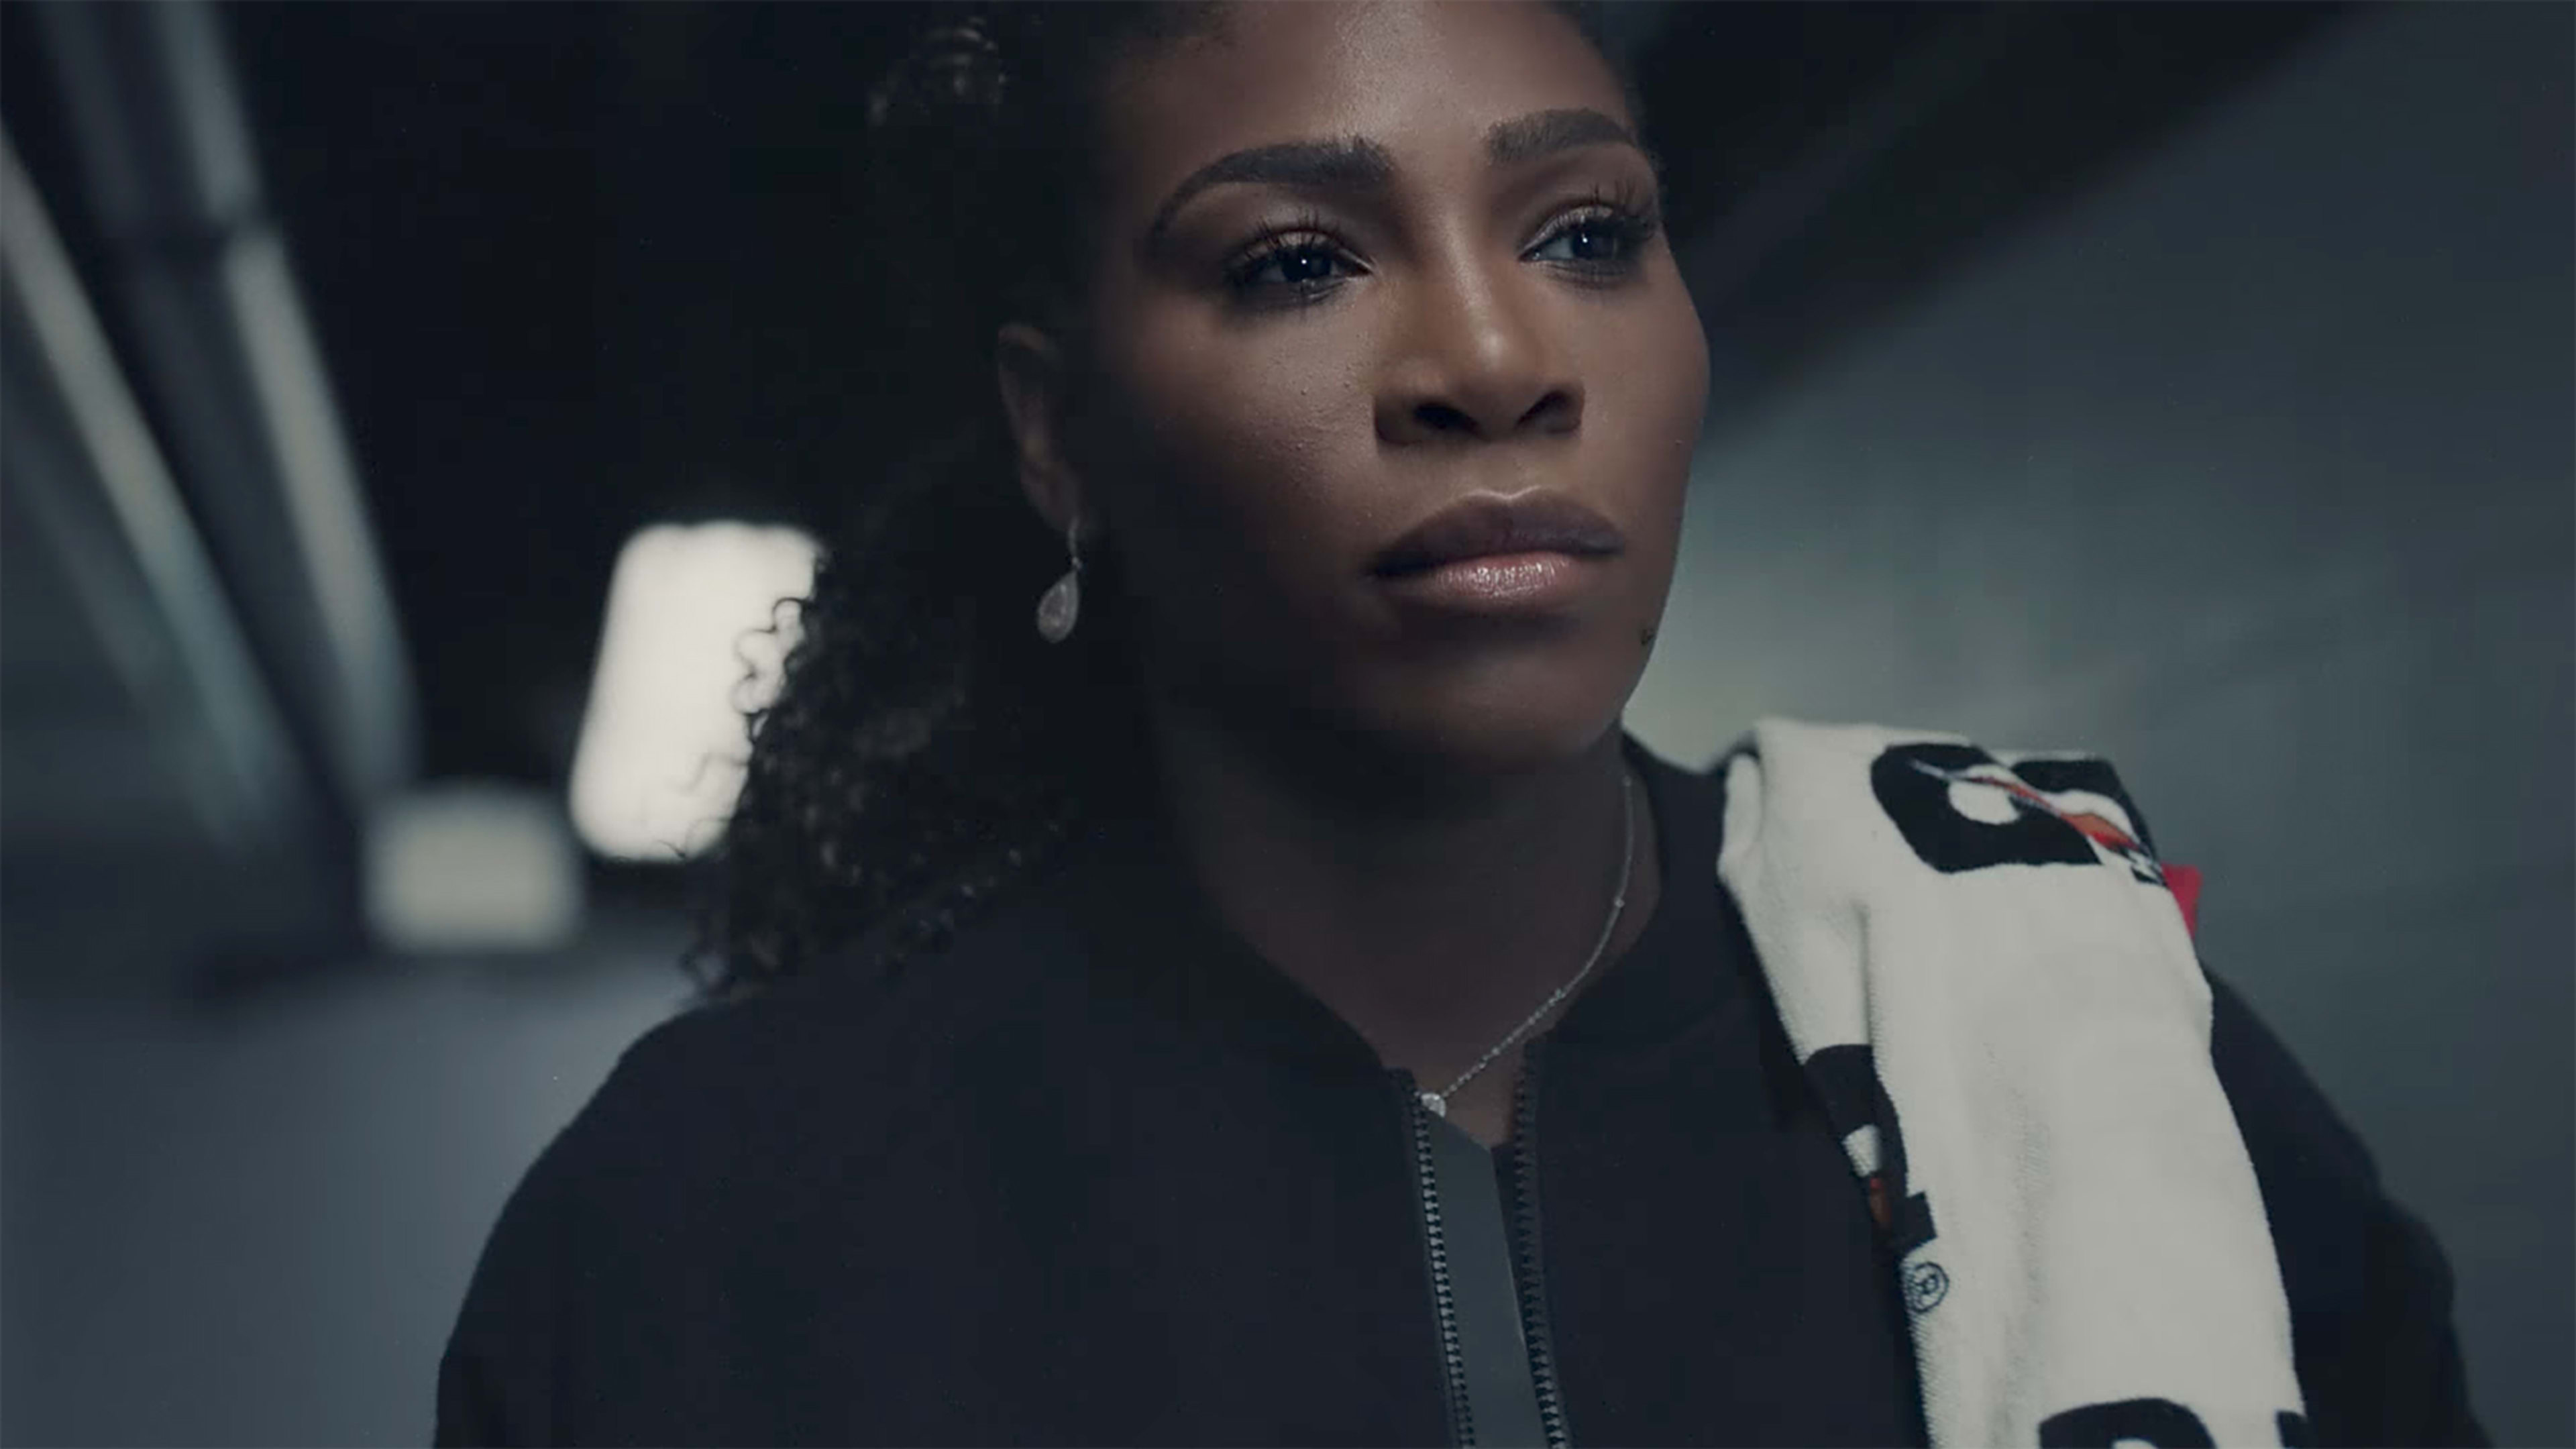 Michael Jordan, Serena Williams, And The Manning Brothers Reveal The Secret To Success